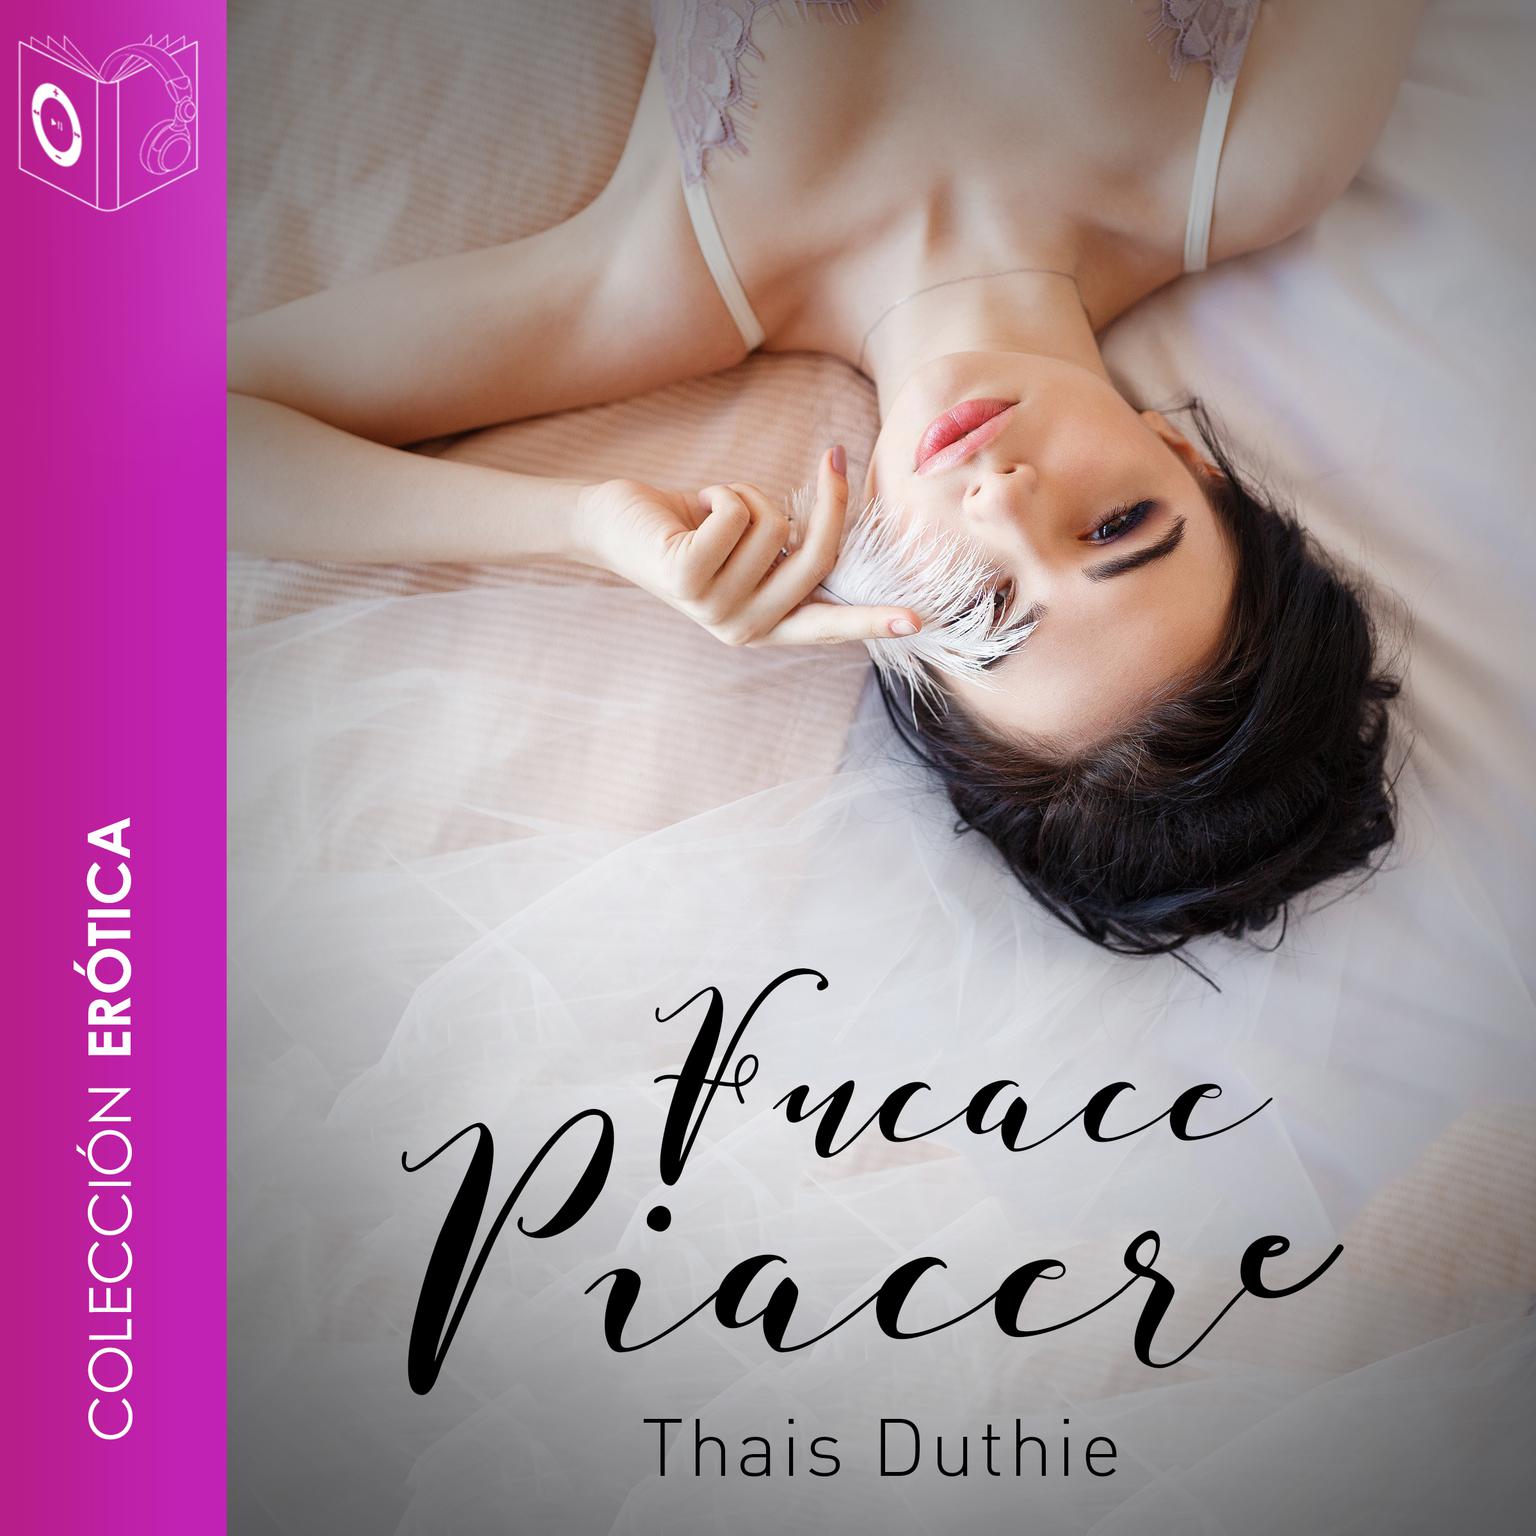 Fugace Piacere Audiobook, by Thais Duthie